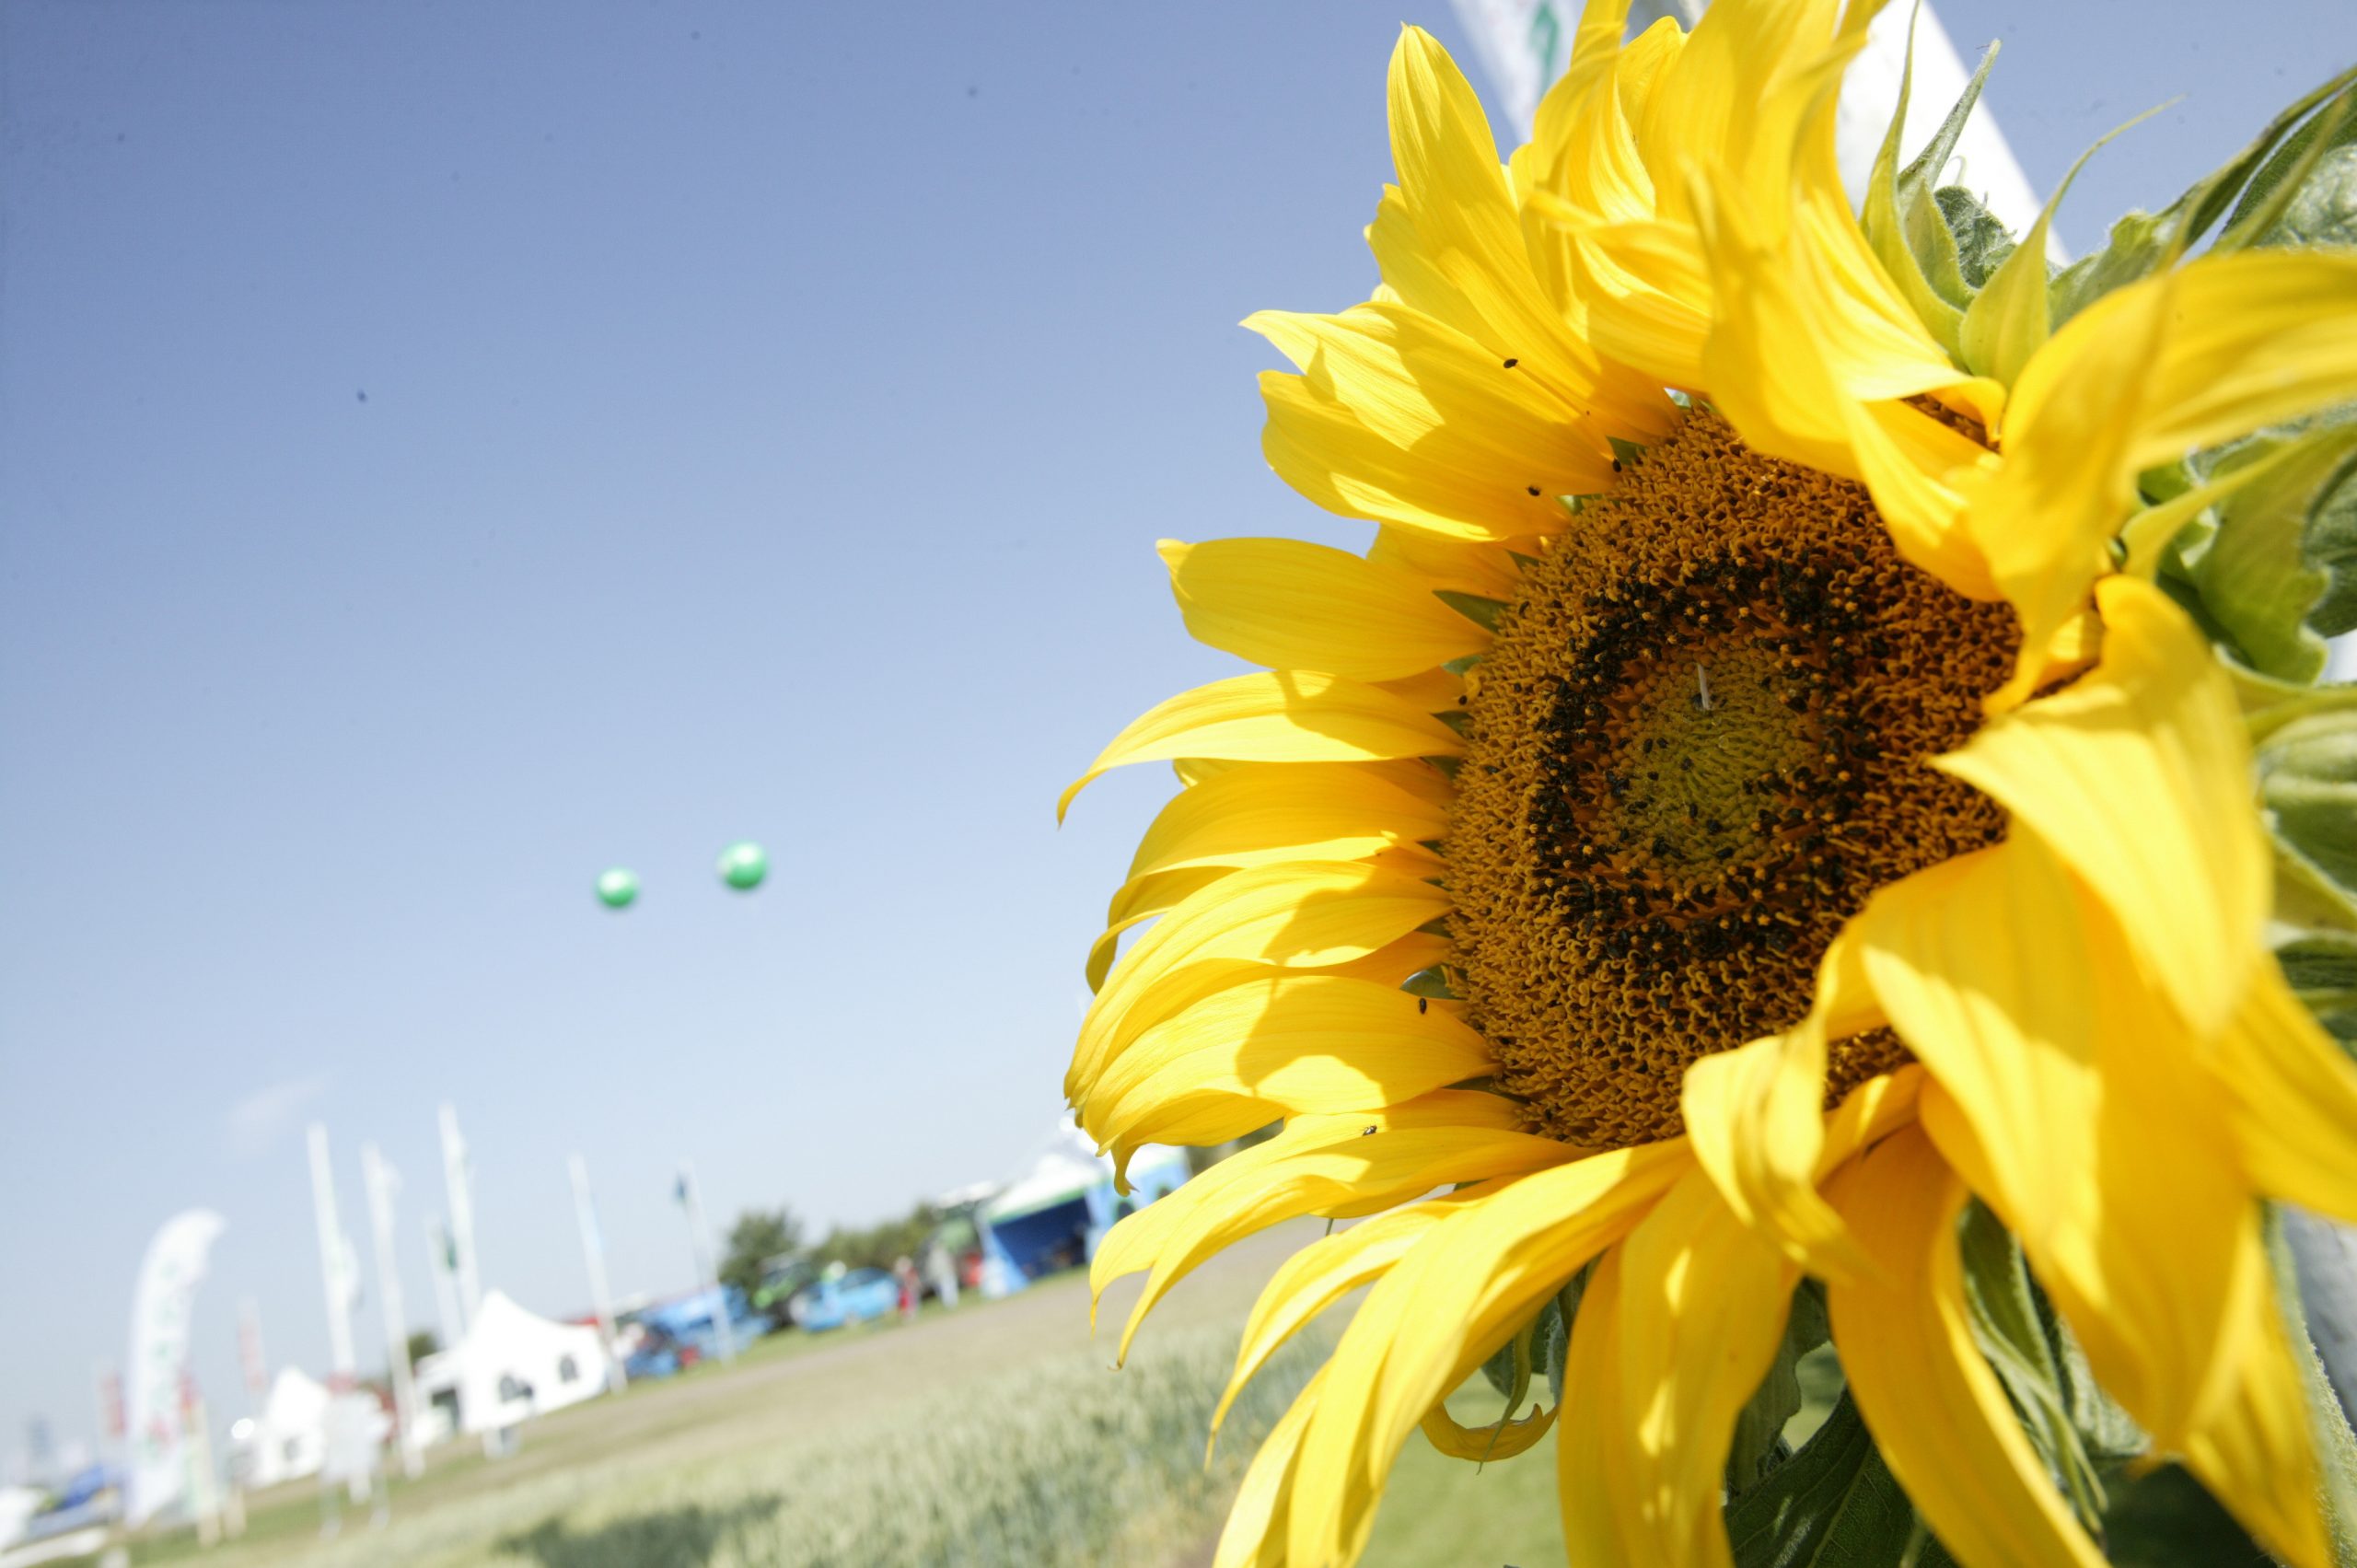 Sunflower seeds often contain aflatoxins. Photo: Henk Riswick